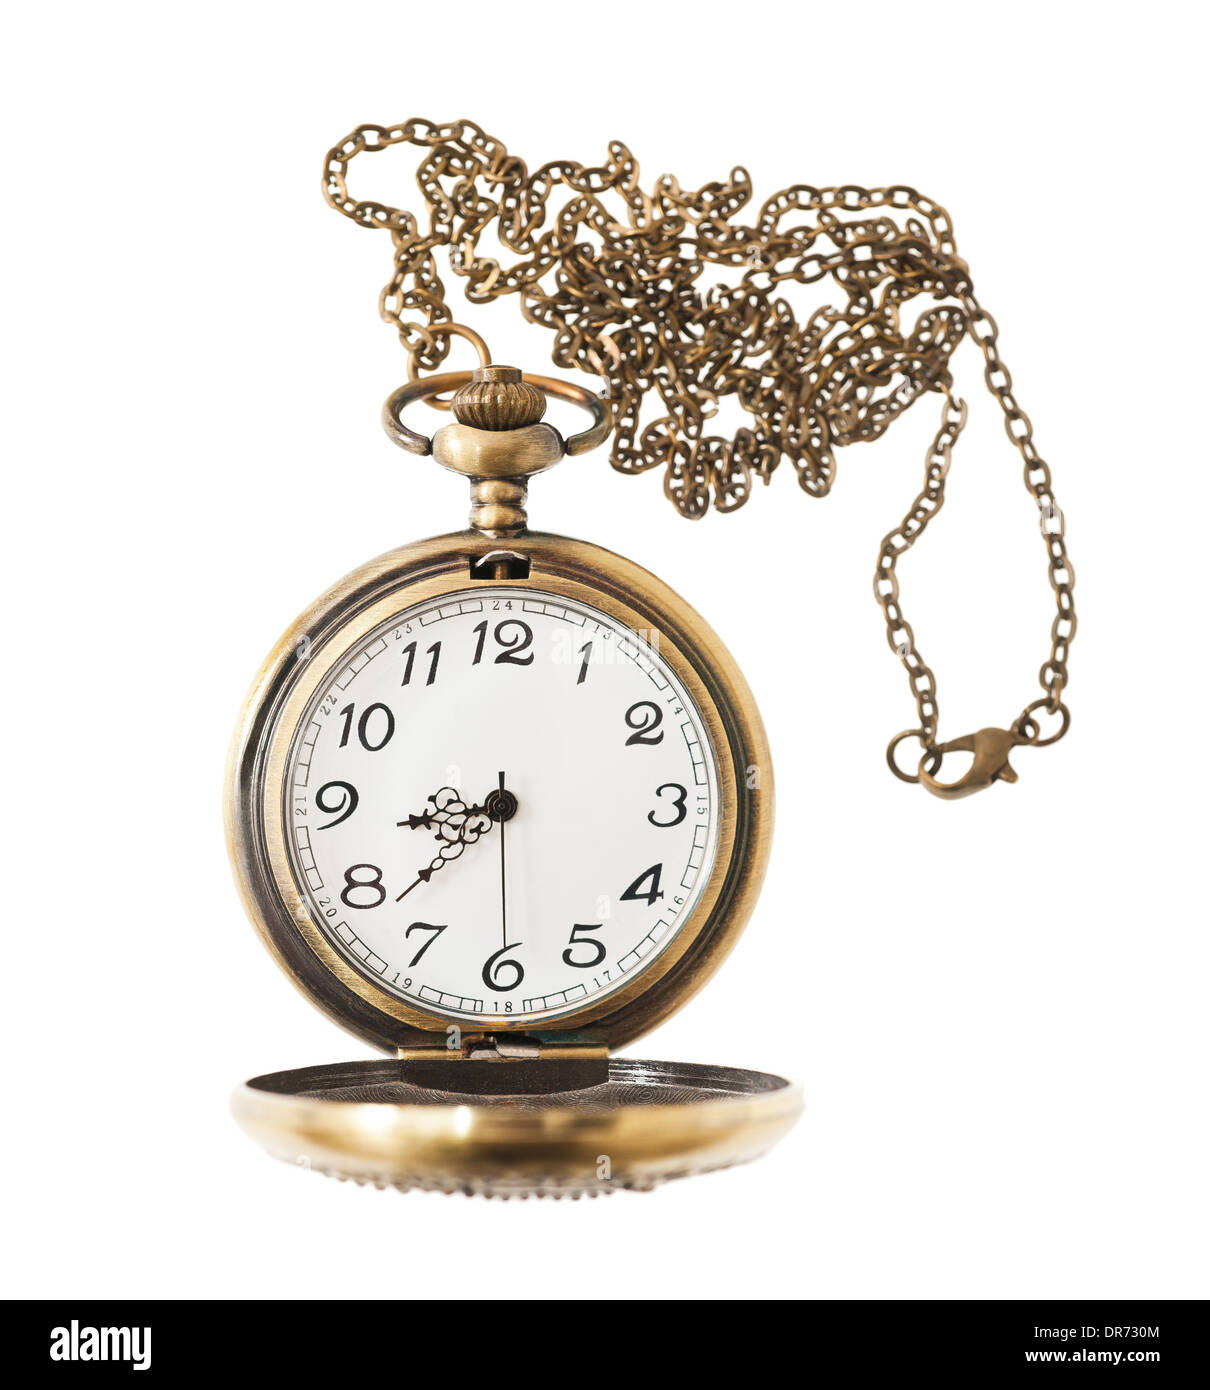 pocket watch with chain isolated on white background Stock Photo